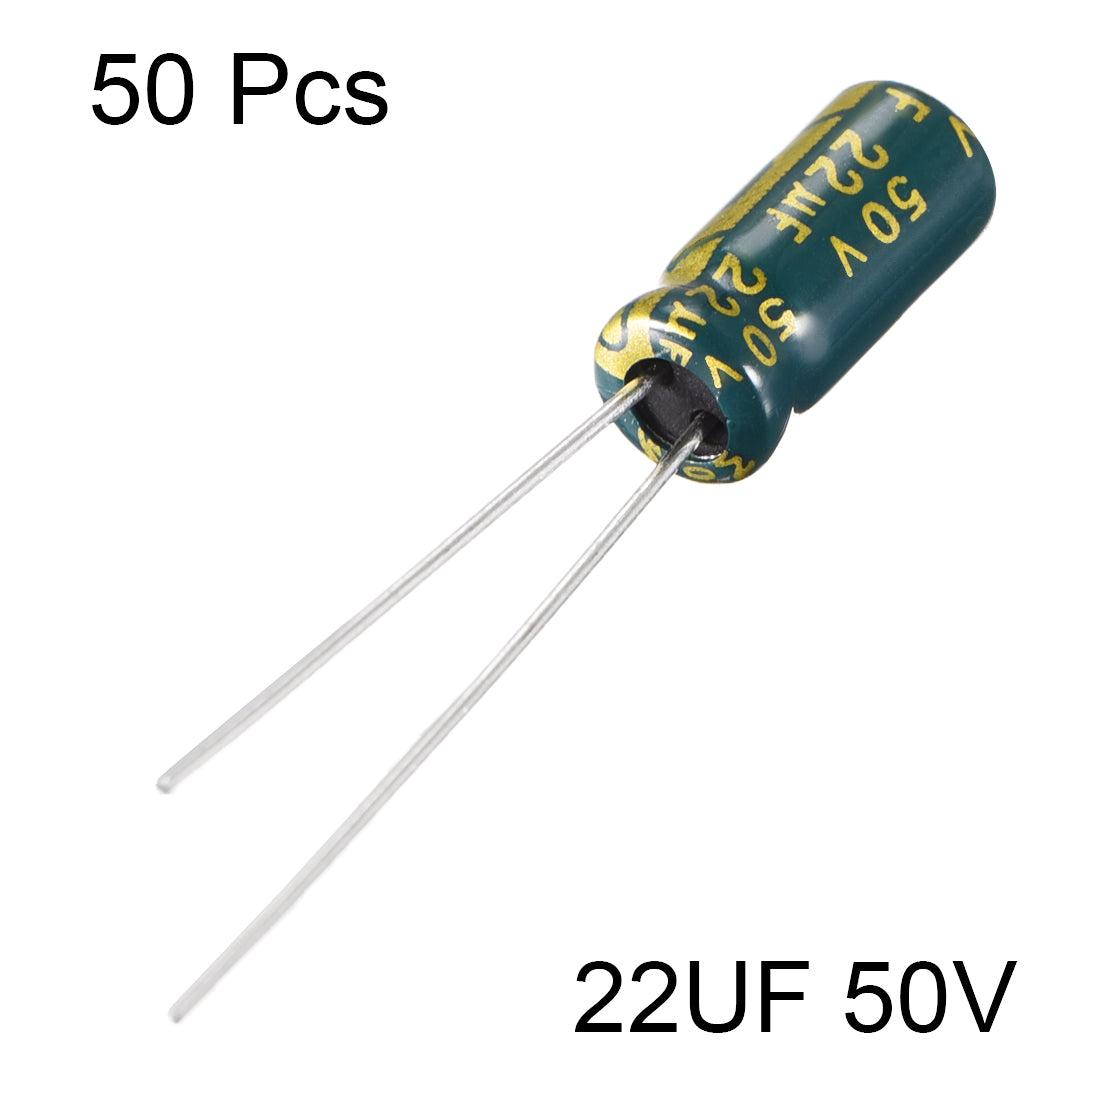 uxcell Uxcell Aluminum Radial Electrolytic Capacitor Low ESR Green with 22UF 50V 105 Celsius Life 3000H 5 x 11 mm High Ripple Current,Low Impedance 50pcs